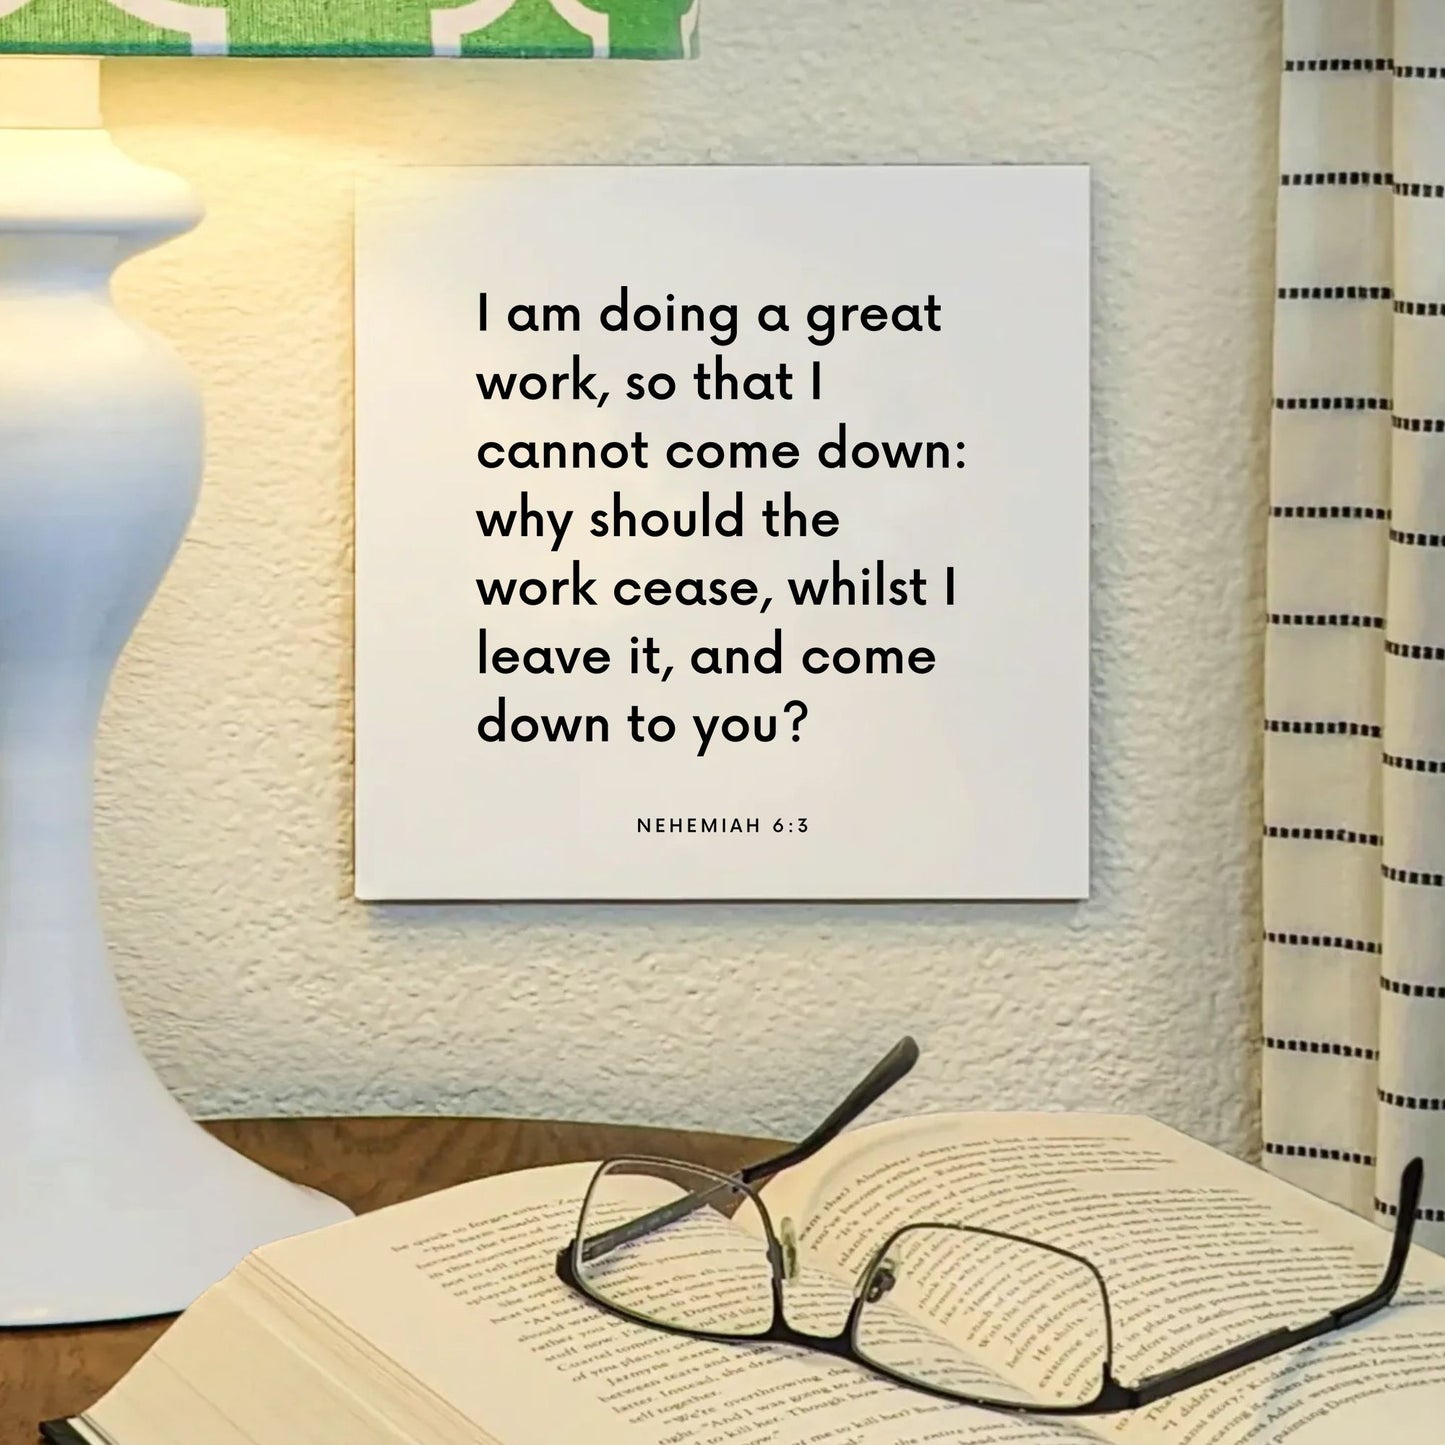 Lamp mouting of the scripture tile for Nehemiah 6:3 - "I am doing a great work, so that I cannot come down"